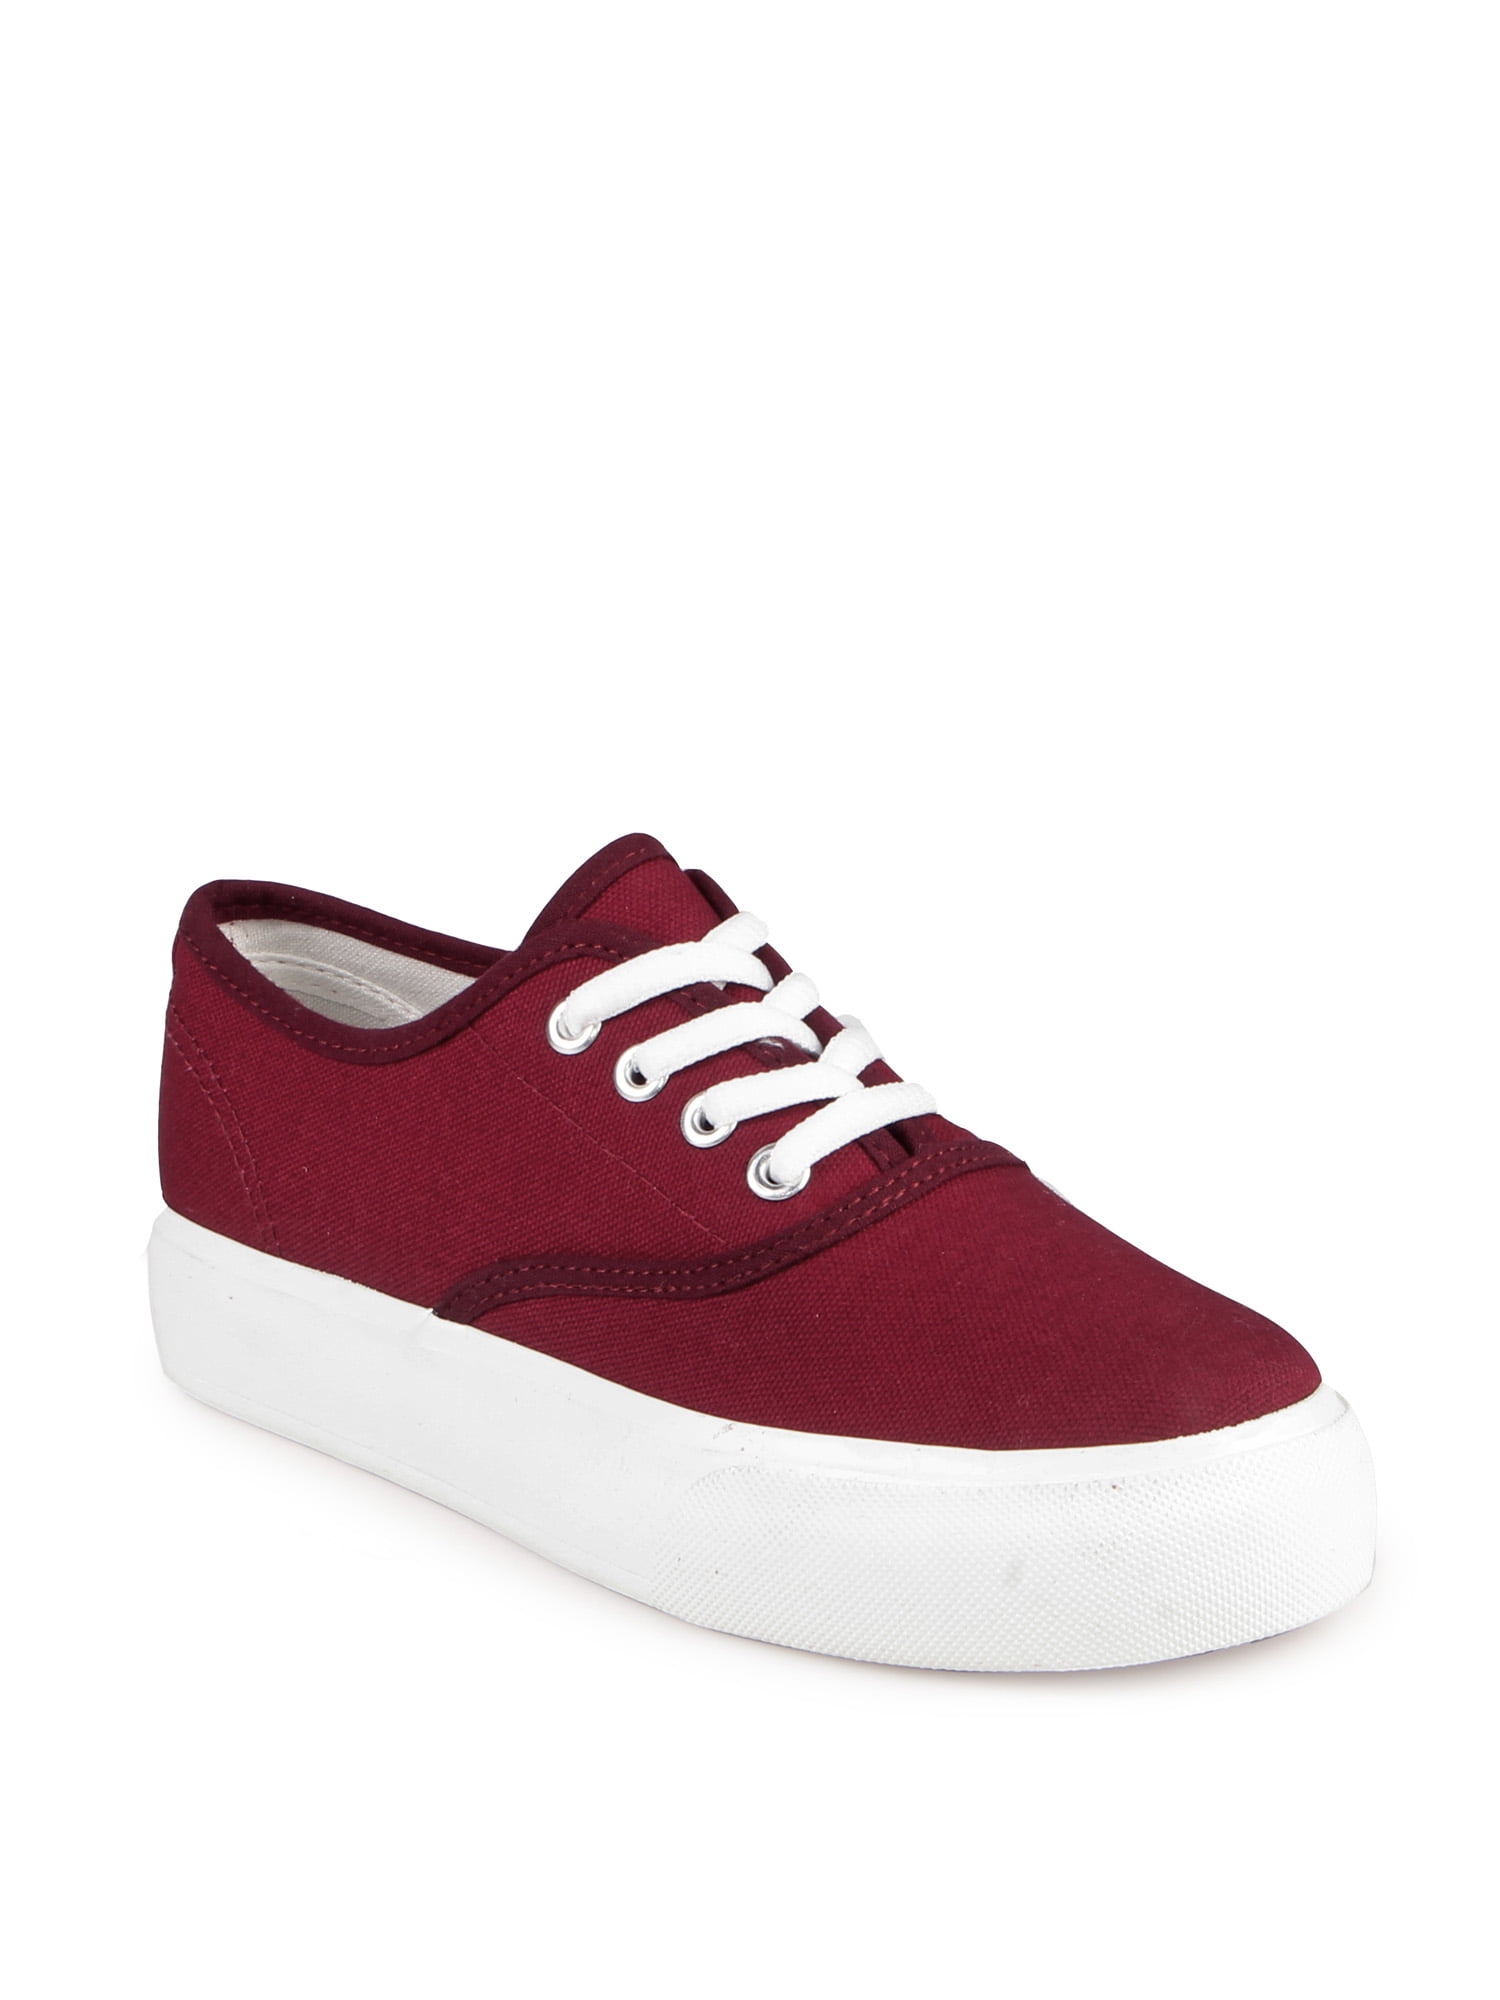 Nature Breeze Lace Up Women's Canvas Sneakers in Burgundy - Walmart.com